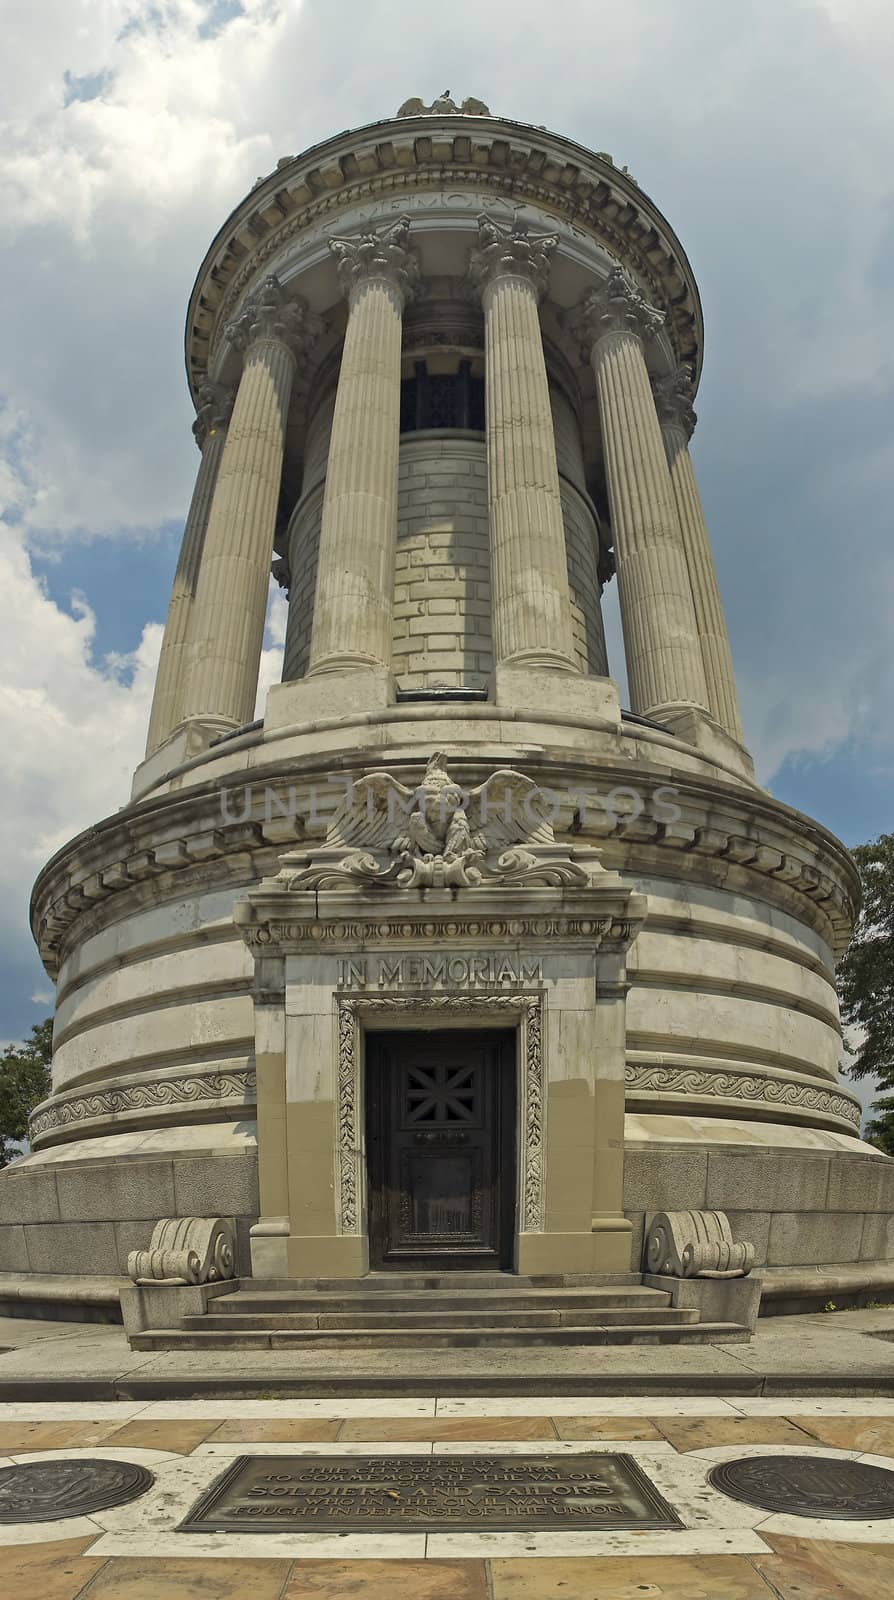 Soldiers' and Sailors' monument by rorem